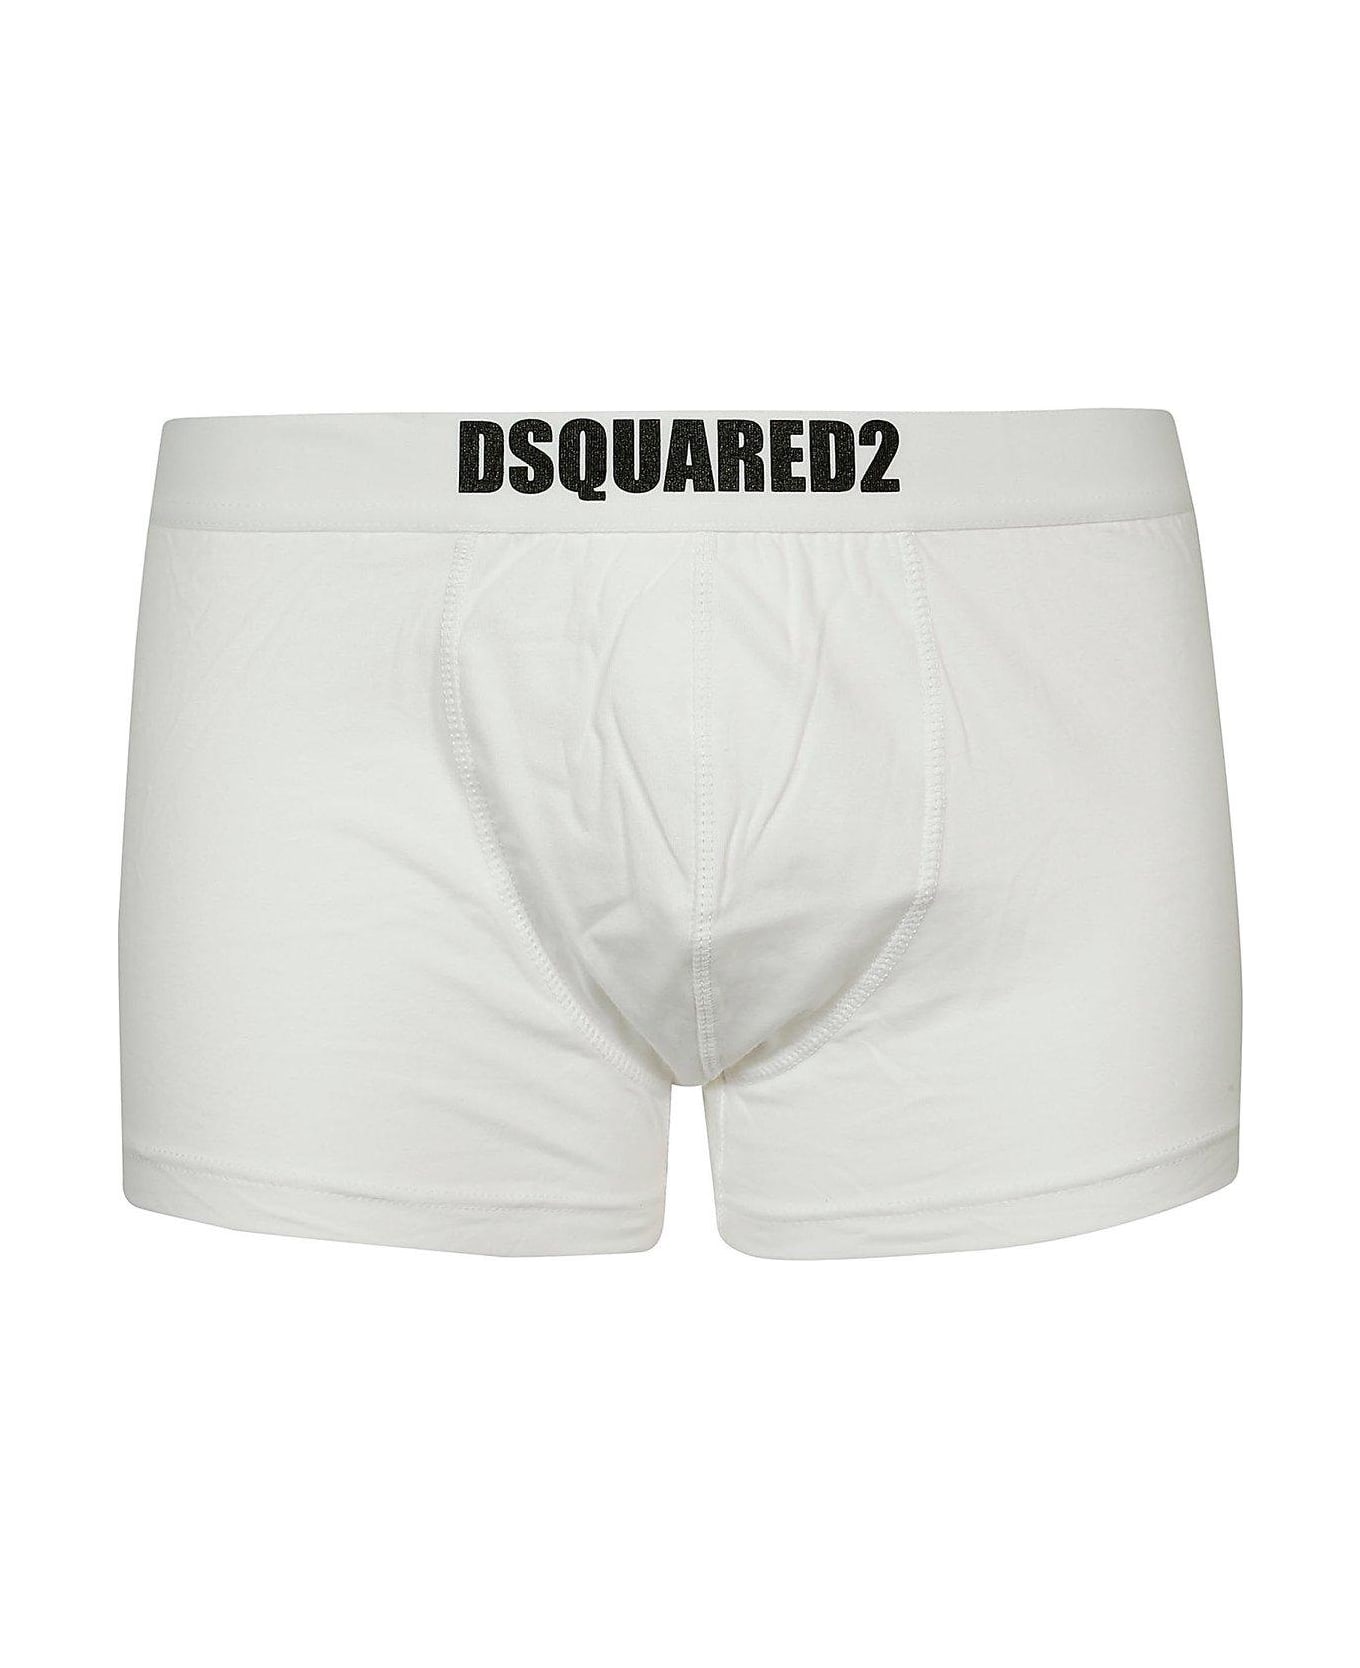 Dsquared2 Logo Printed Two Packs Of Boxers - White ショーツ